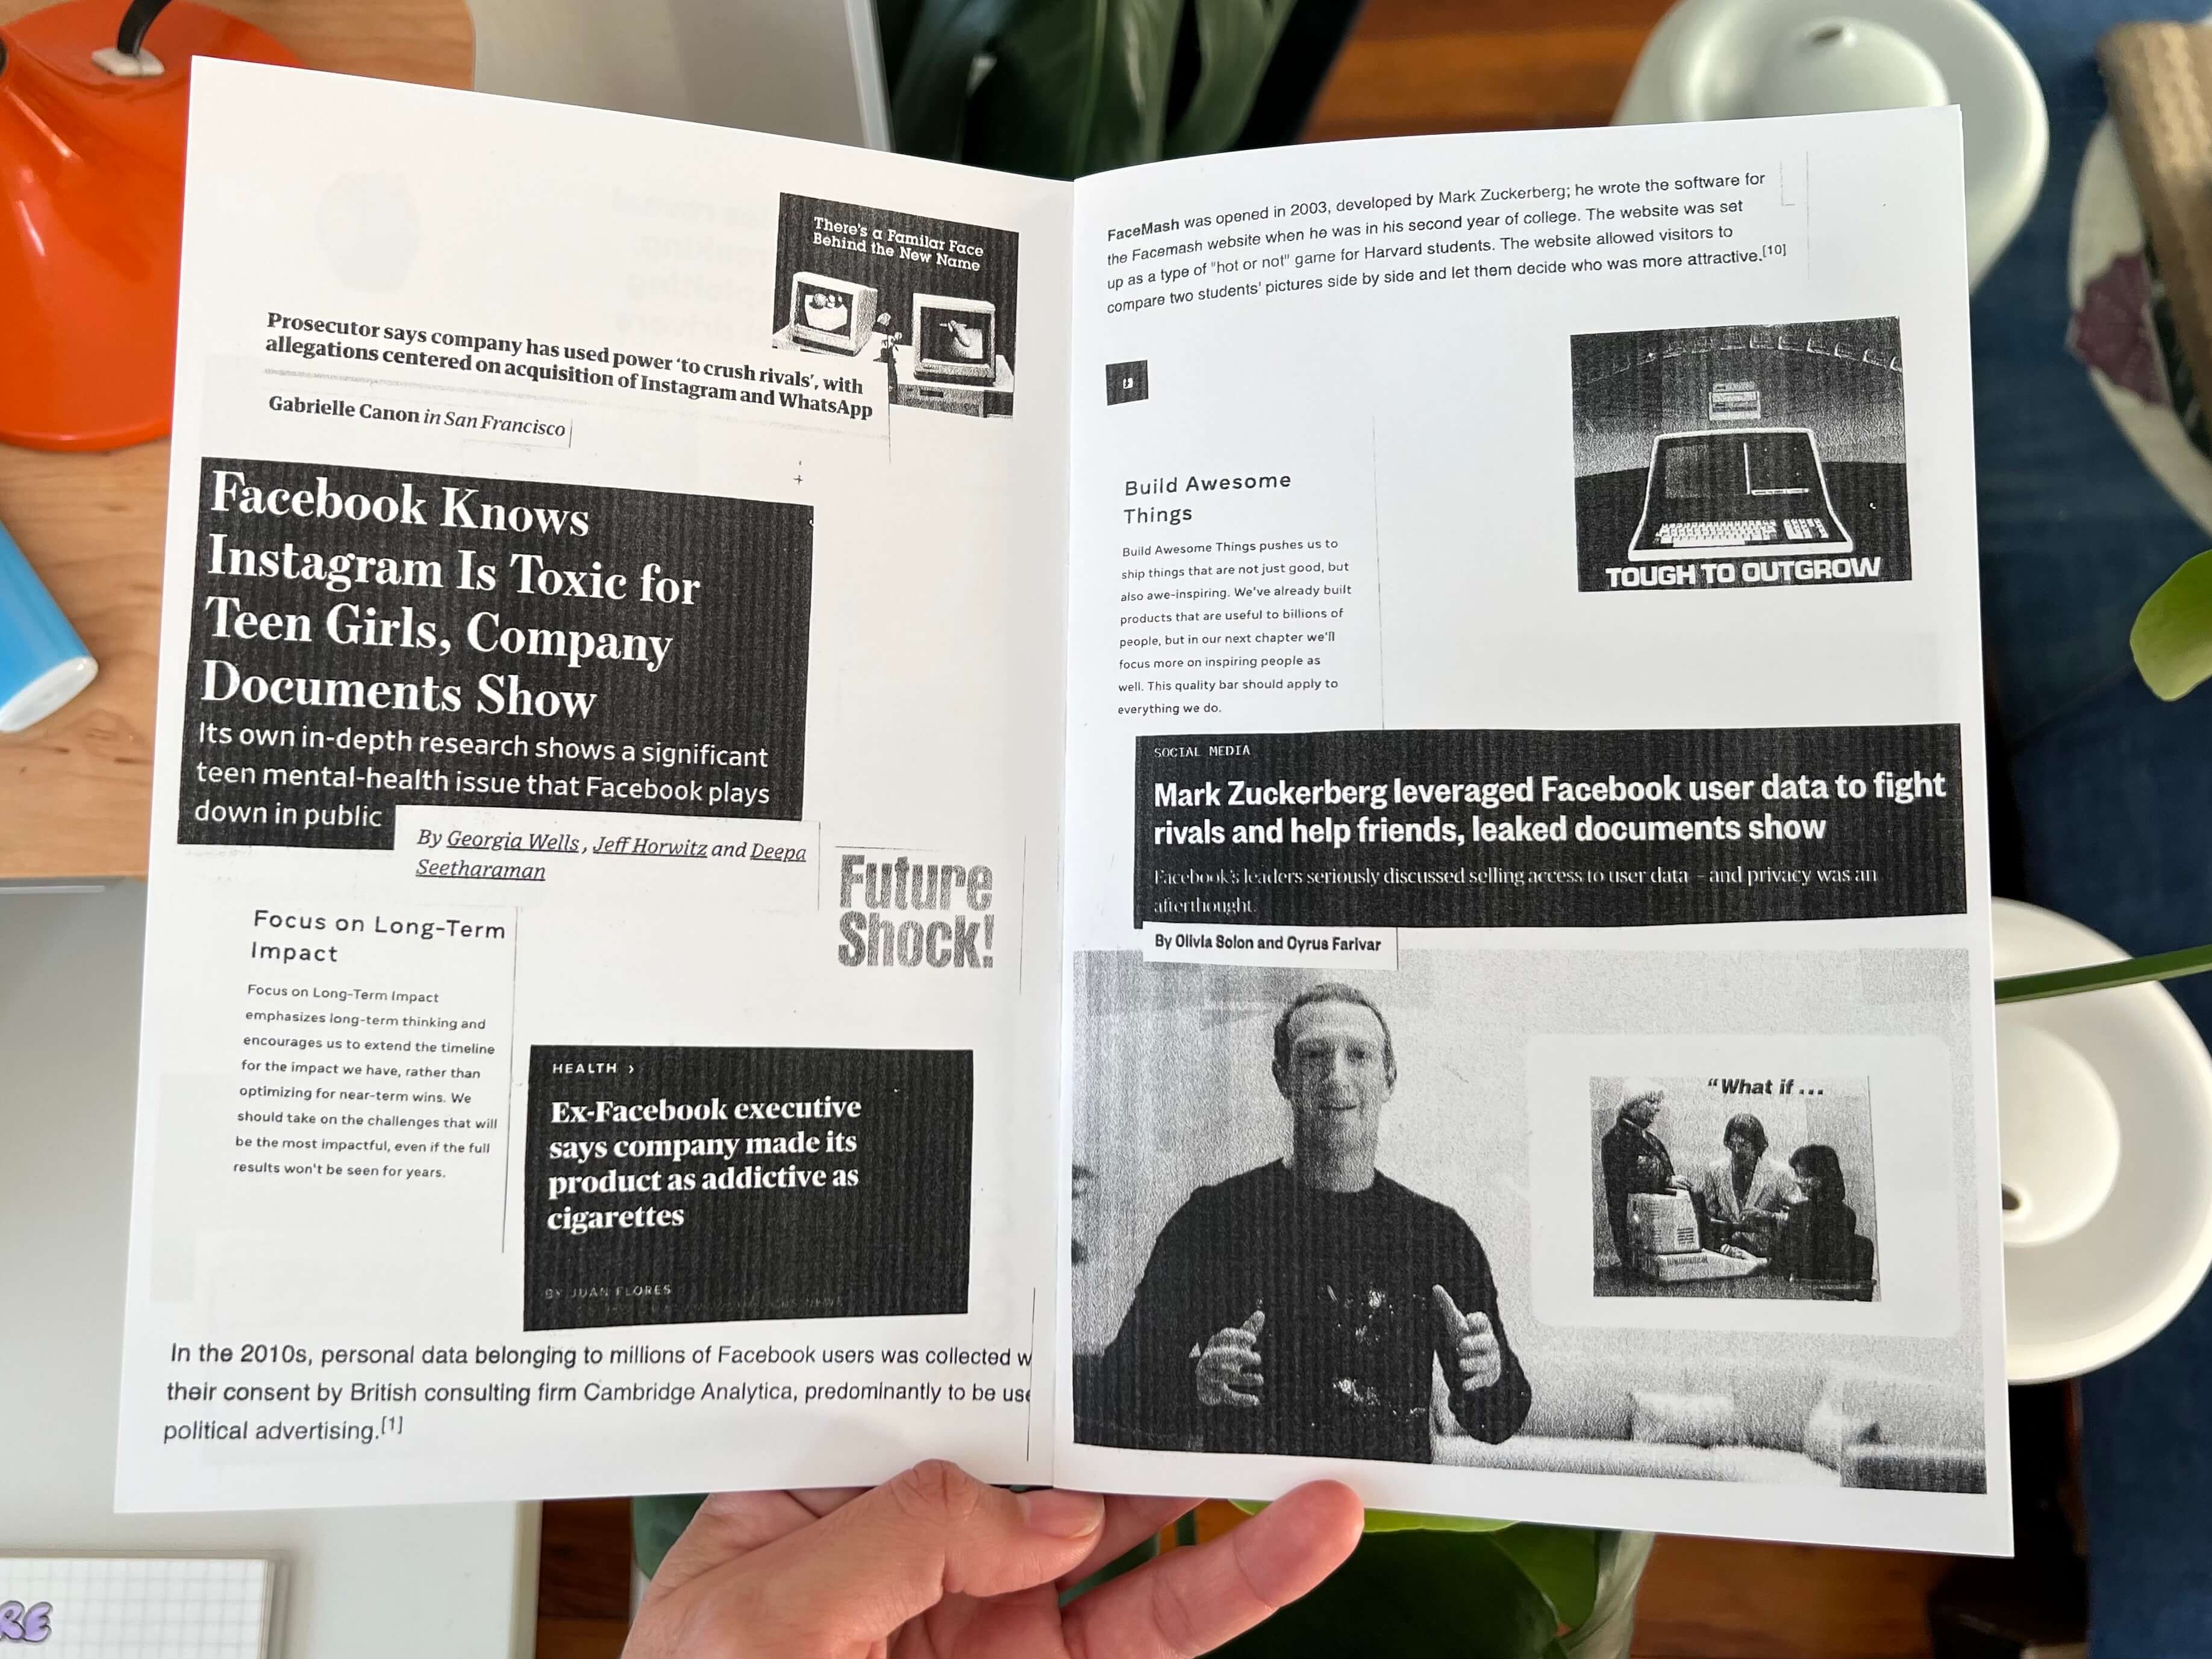 A spread in the zine about Facebook (now Meta) and its core values, like 'Focus On Long-Term Impact,' and news article headlines about Facebook, such as 'Facebook Knows Instagram is Toxic To Teen Girls, Company Documents Show.'